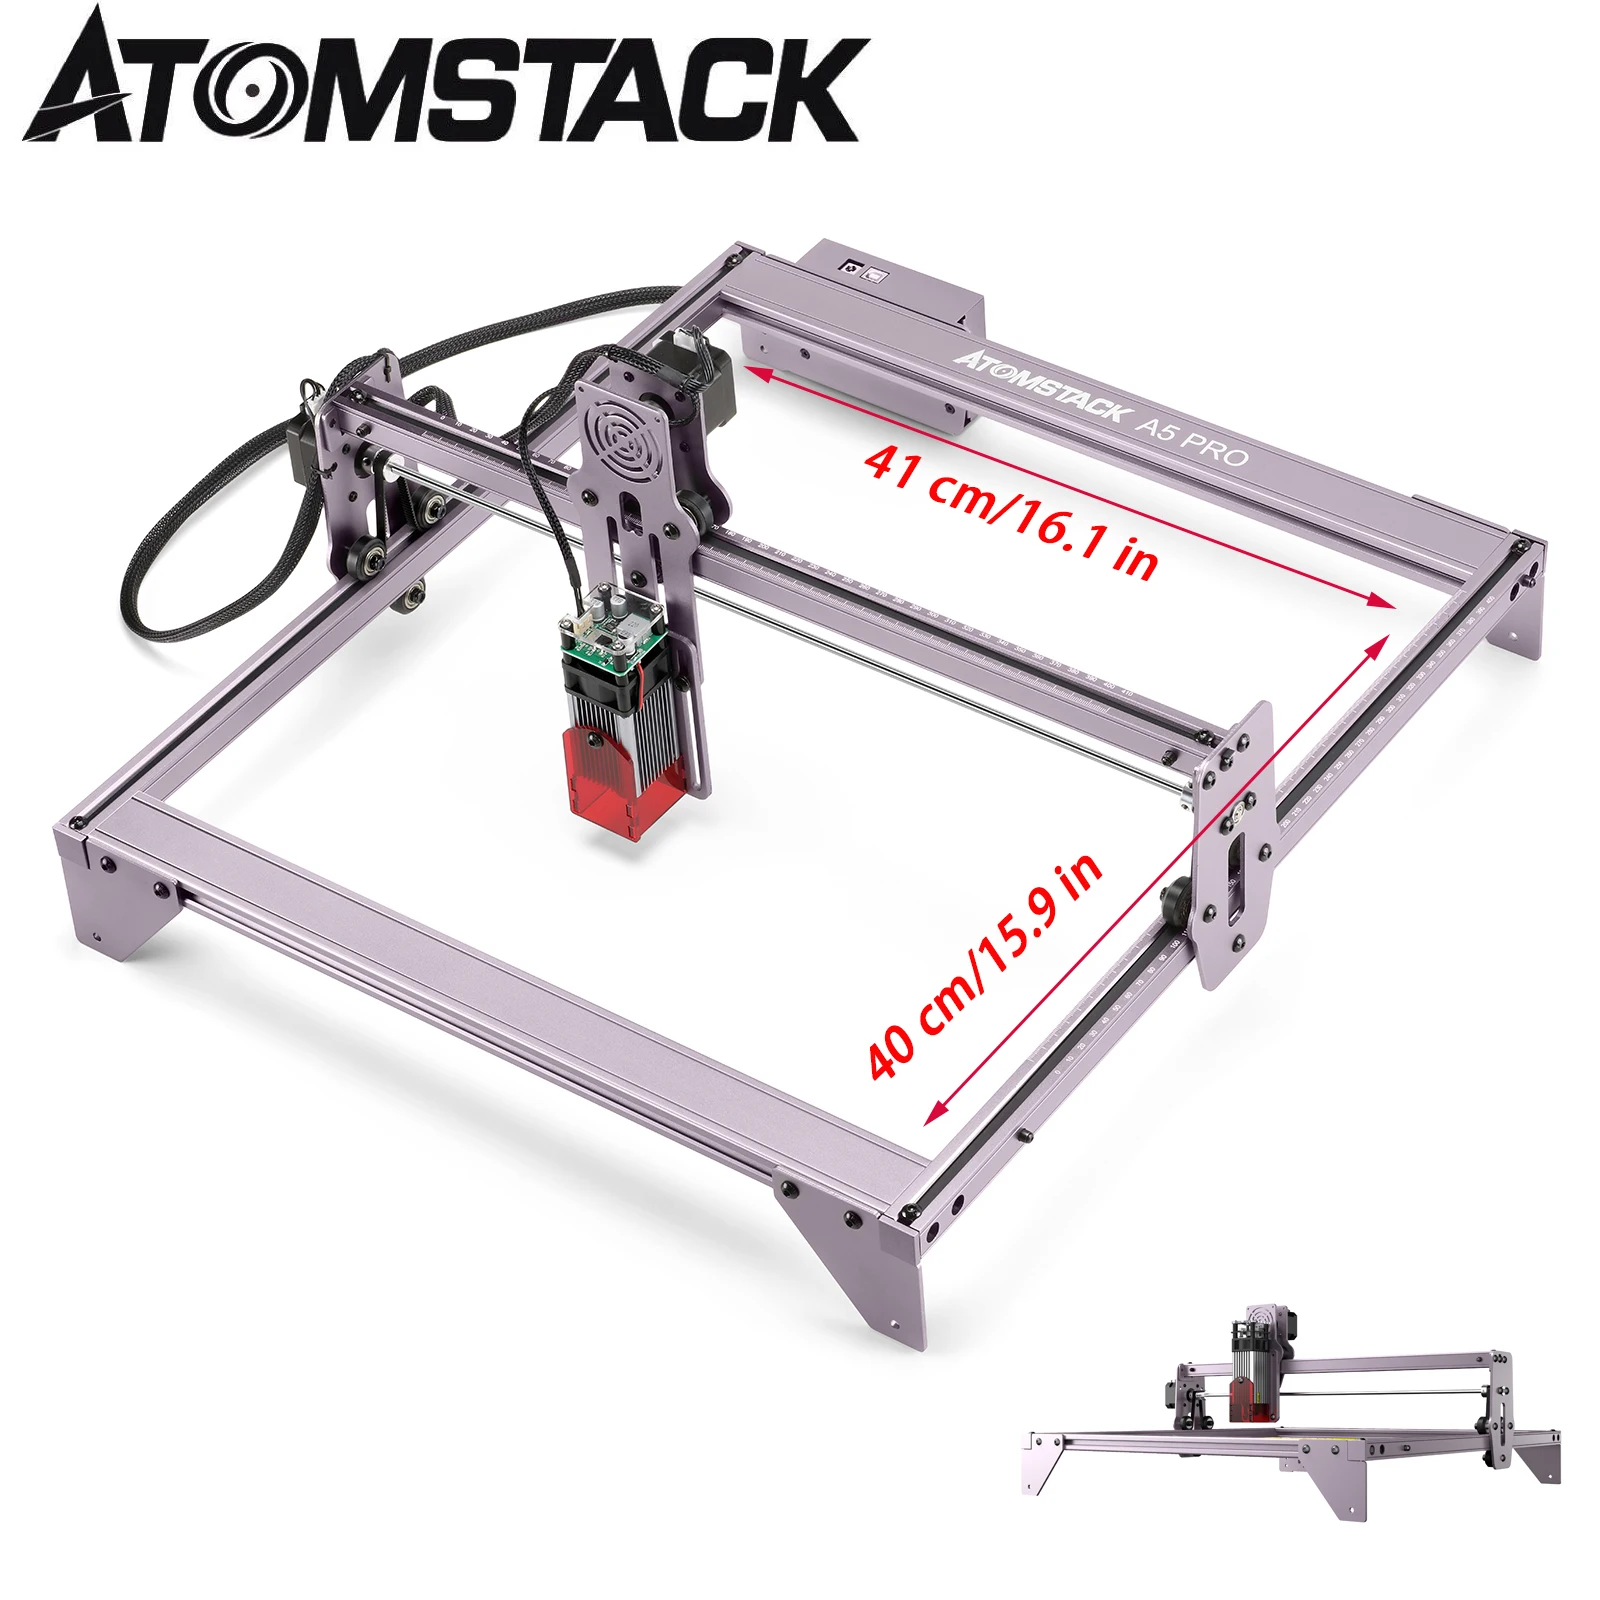 Laser Engraver 40W ATOMSTACK A5 Pro Engraving Machine Craft Wood Leather Metal Acrylic CNC Router Printer Carving Desktop Cutter